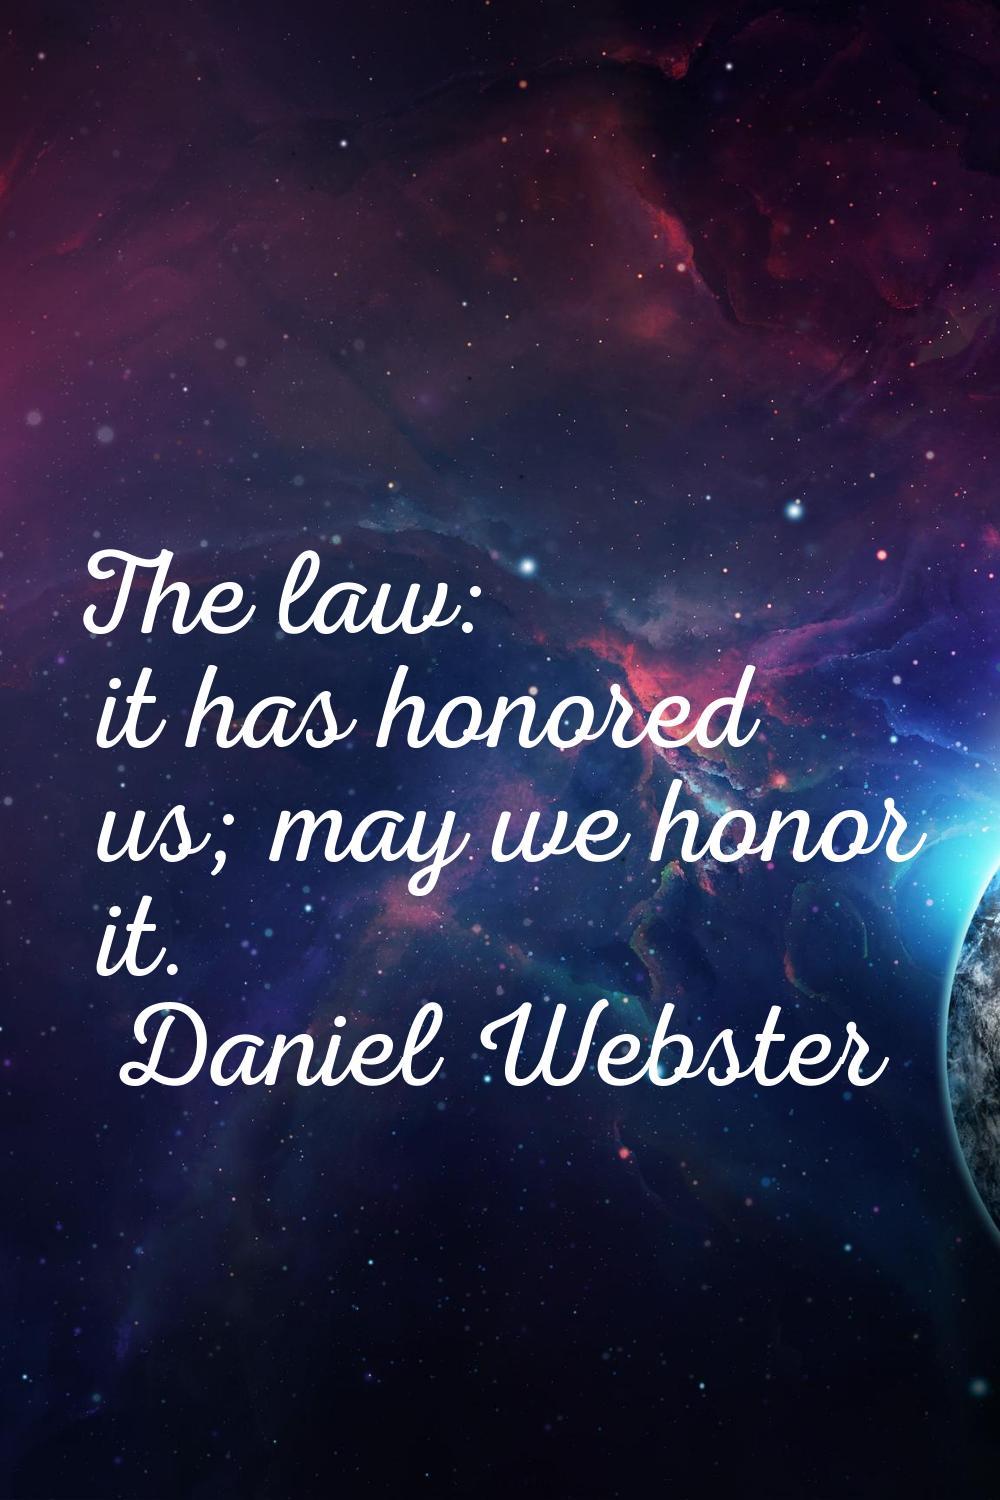 The law: it has honored us; may we honor it.